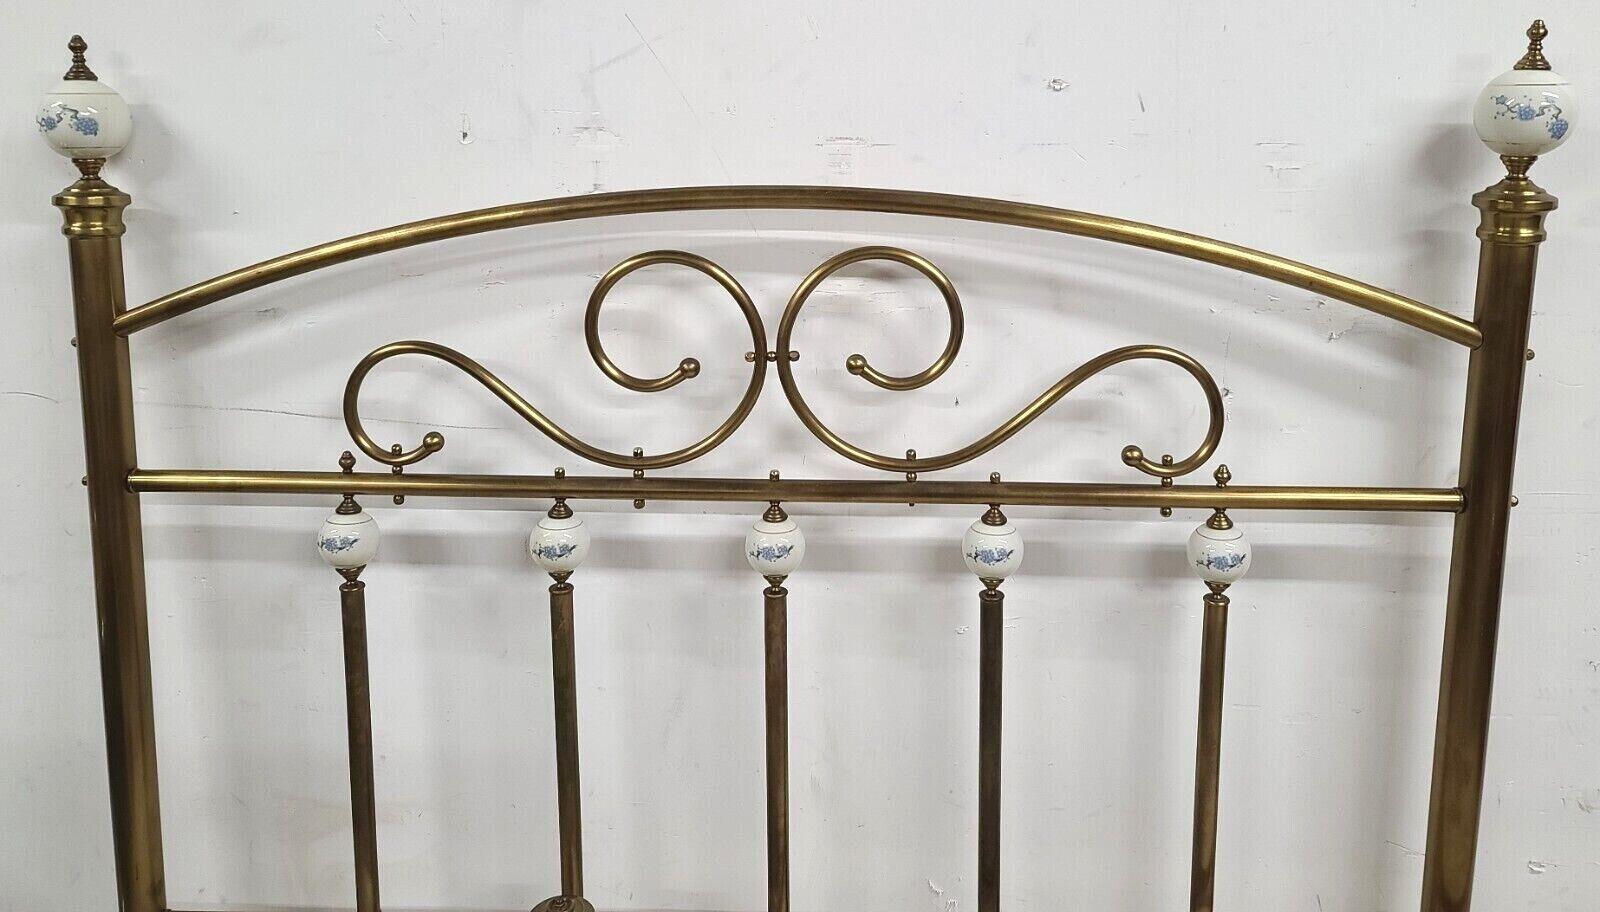 Offering one of our recent palm beach estate fine furniture acquisitions of
A mid-century Victorian brass & porcelain queen bed frame 
Compatible with a standard metal mattress frame which can be purchased for $25 at most thrift